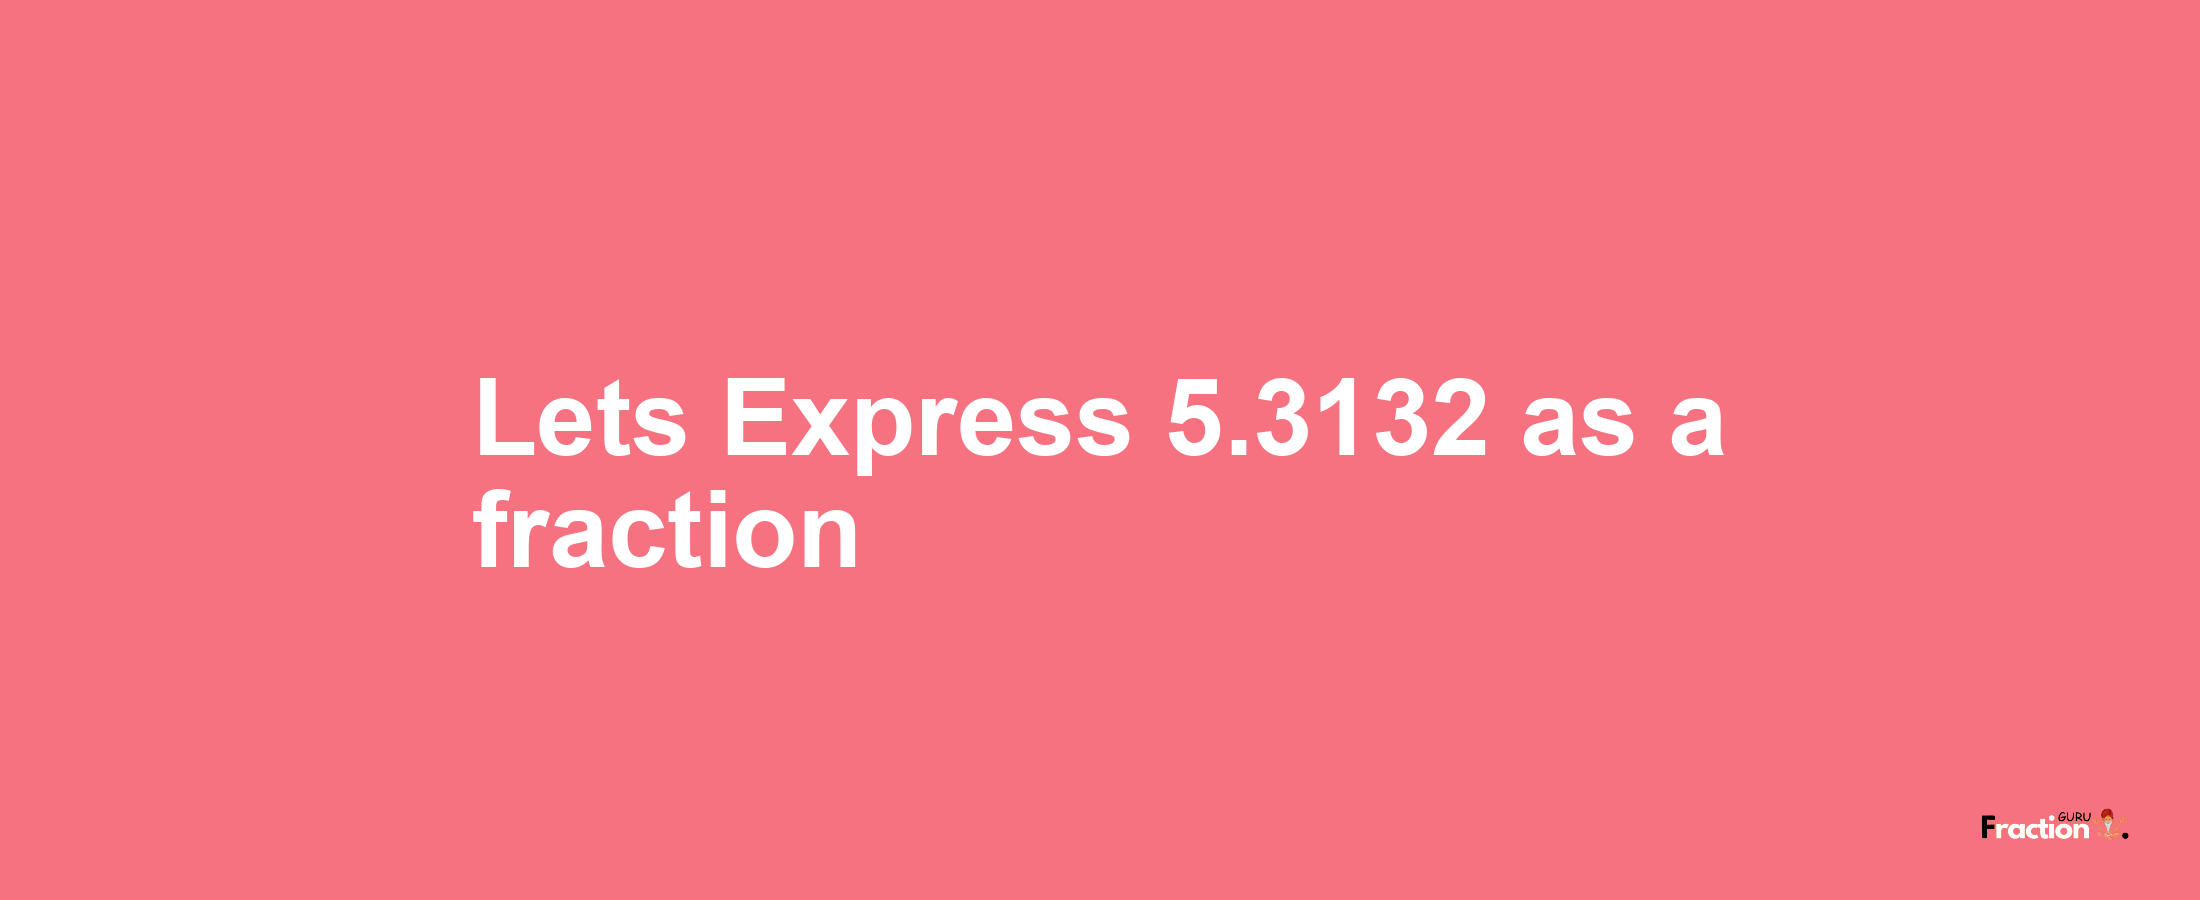 Lets Express 5.3132 as afraction